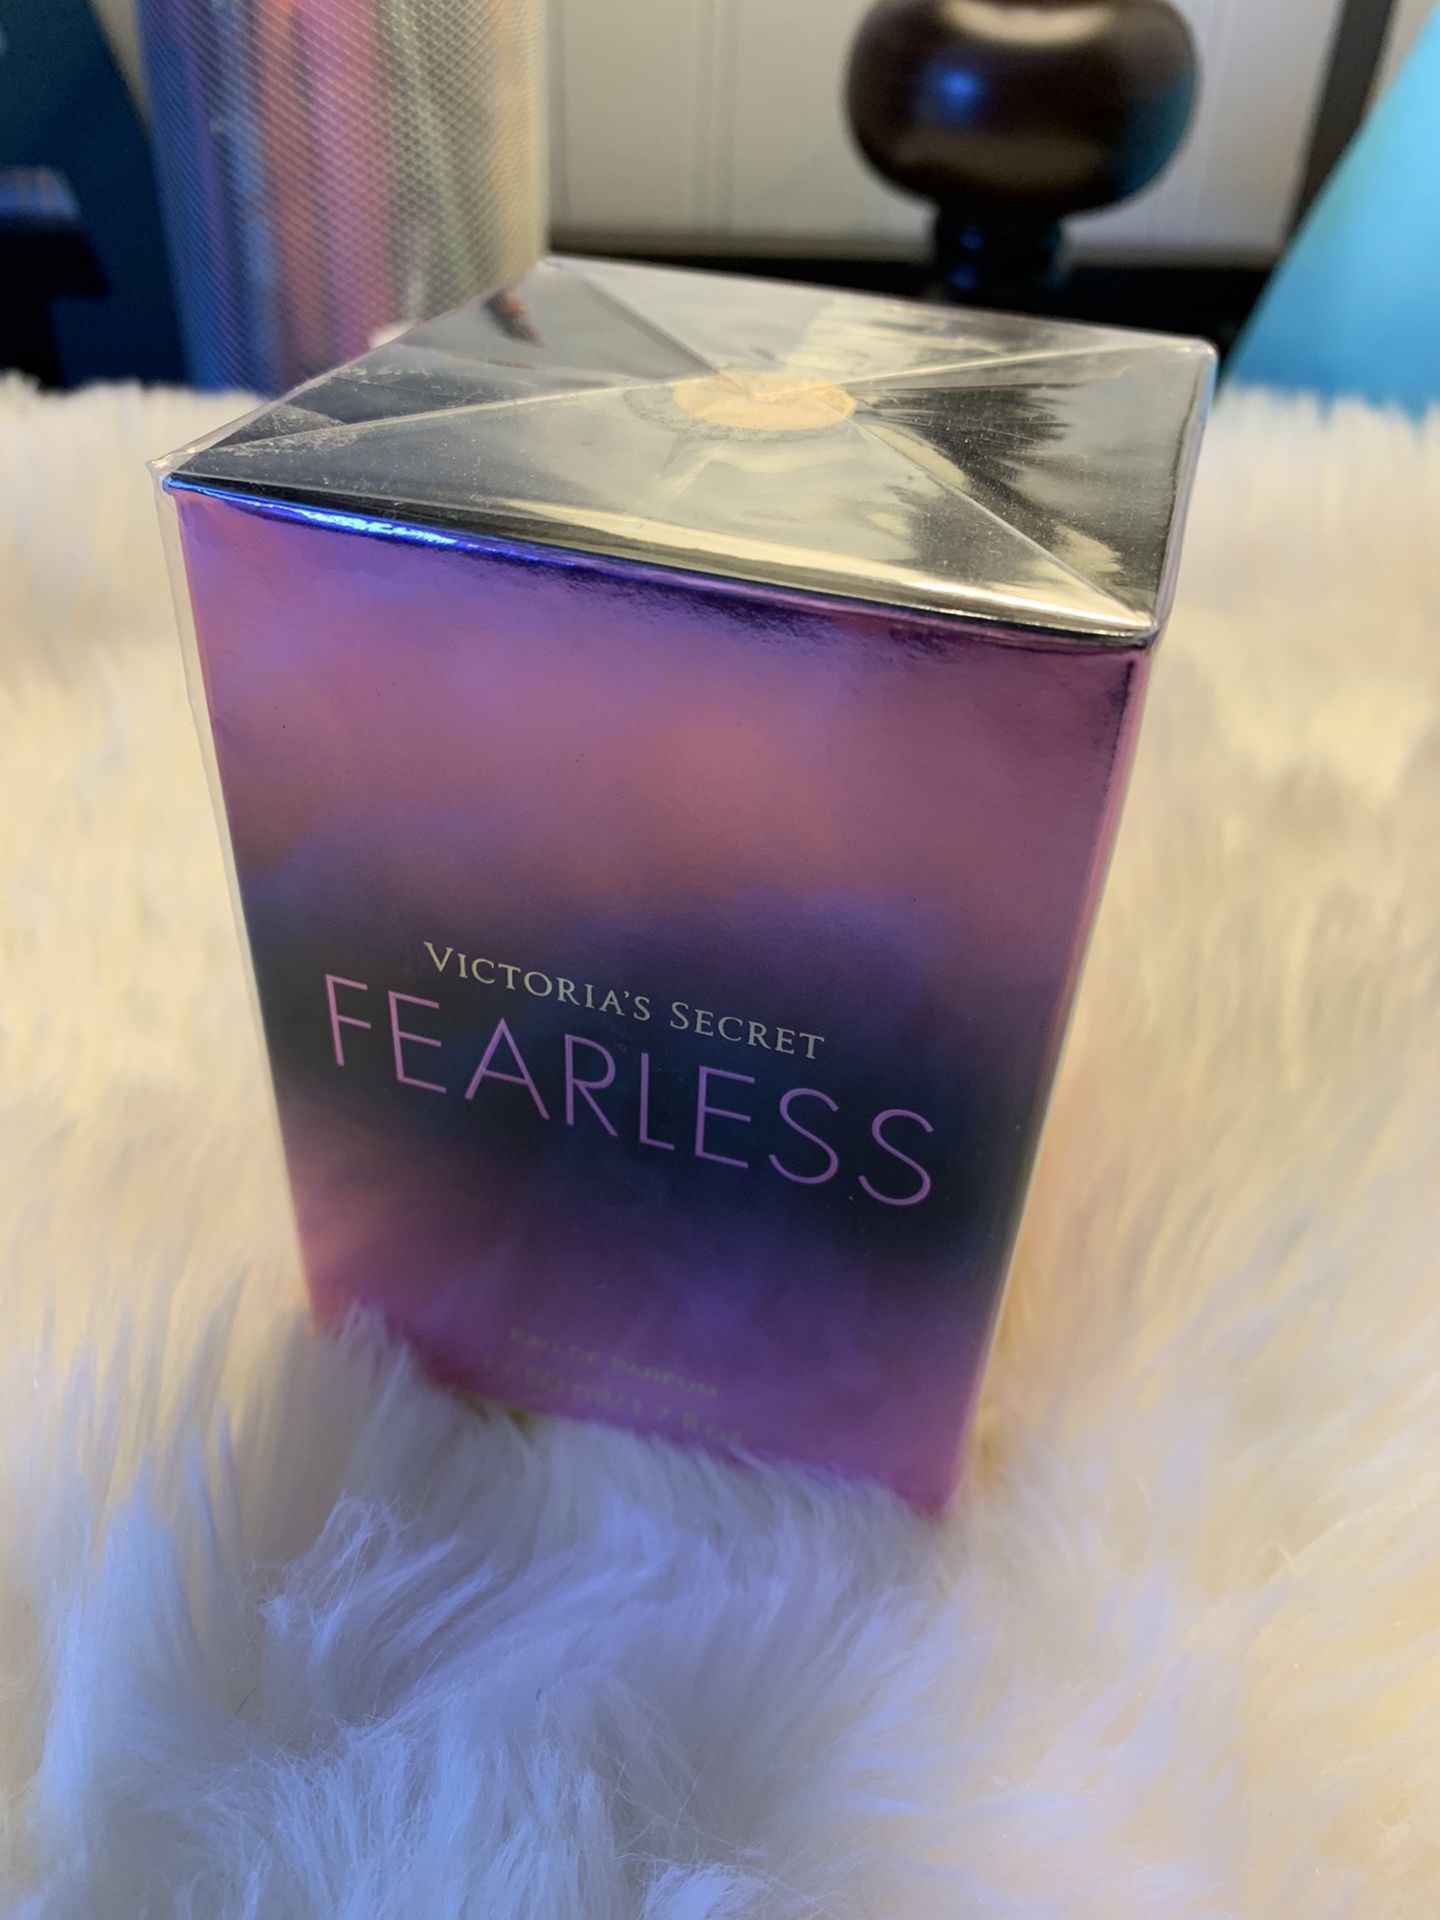 Discontinued FEARLESS Victoria Secret perfume